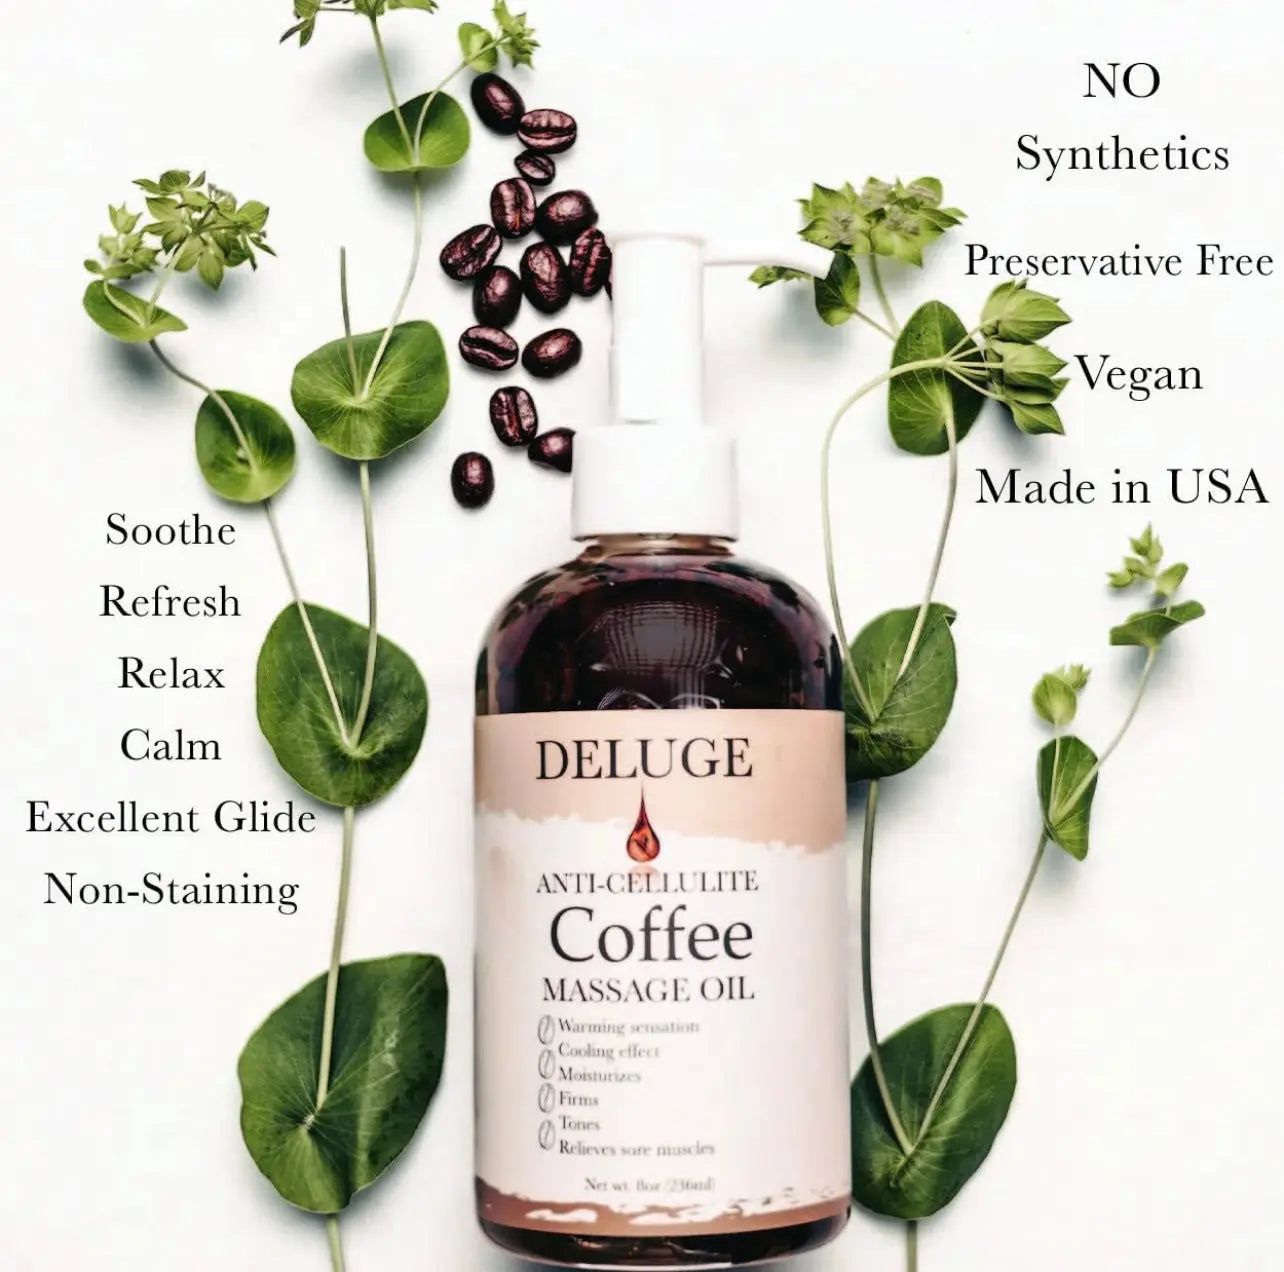 Deluge Original Massage Oil with coffee for Cellulite Treatment, Full Body Spa Relaxation Therapy and Sore Muscles. DELUGE Cosmetics